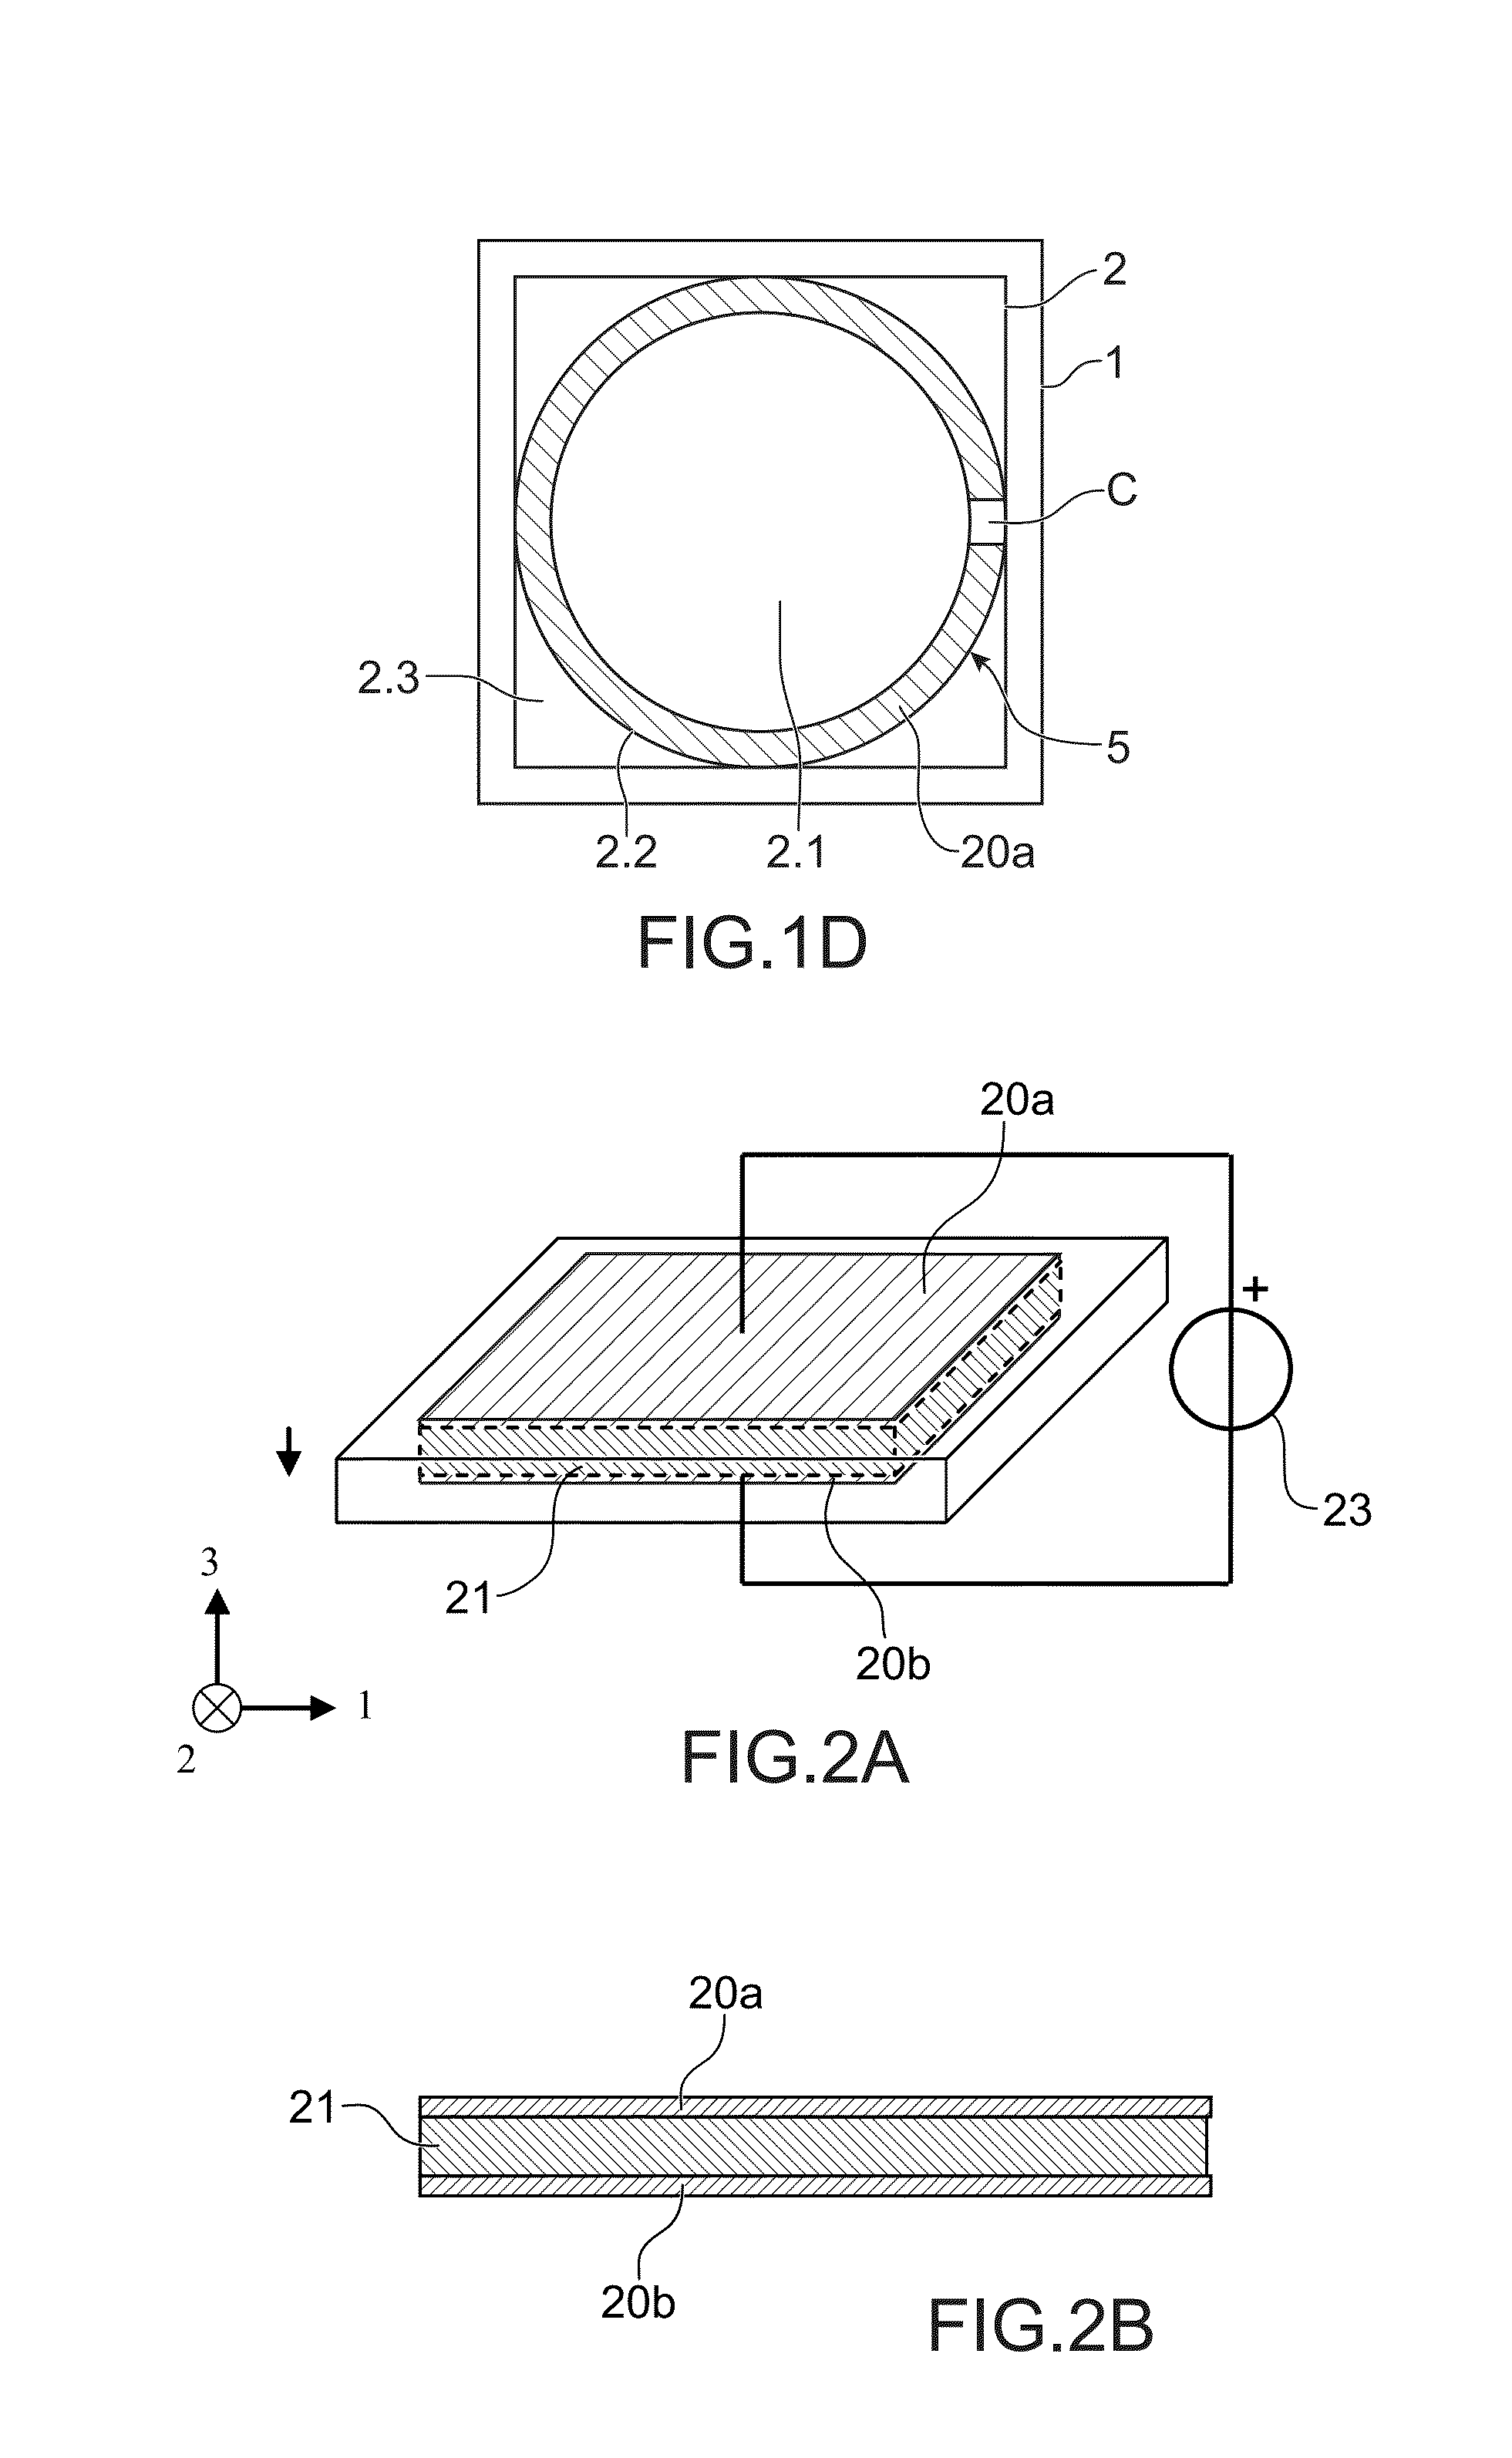 Optical device with a piezoelectrically actuated deformable membrane shaped as a continuous crown